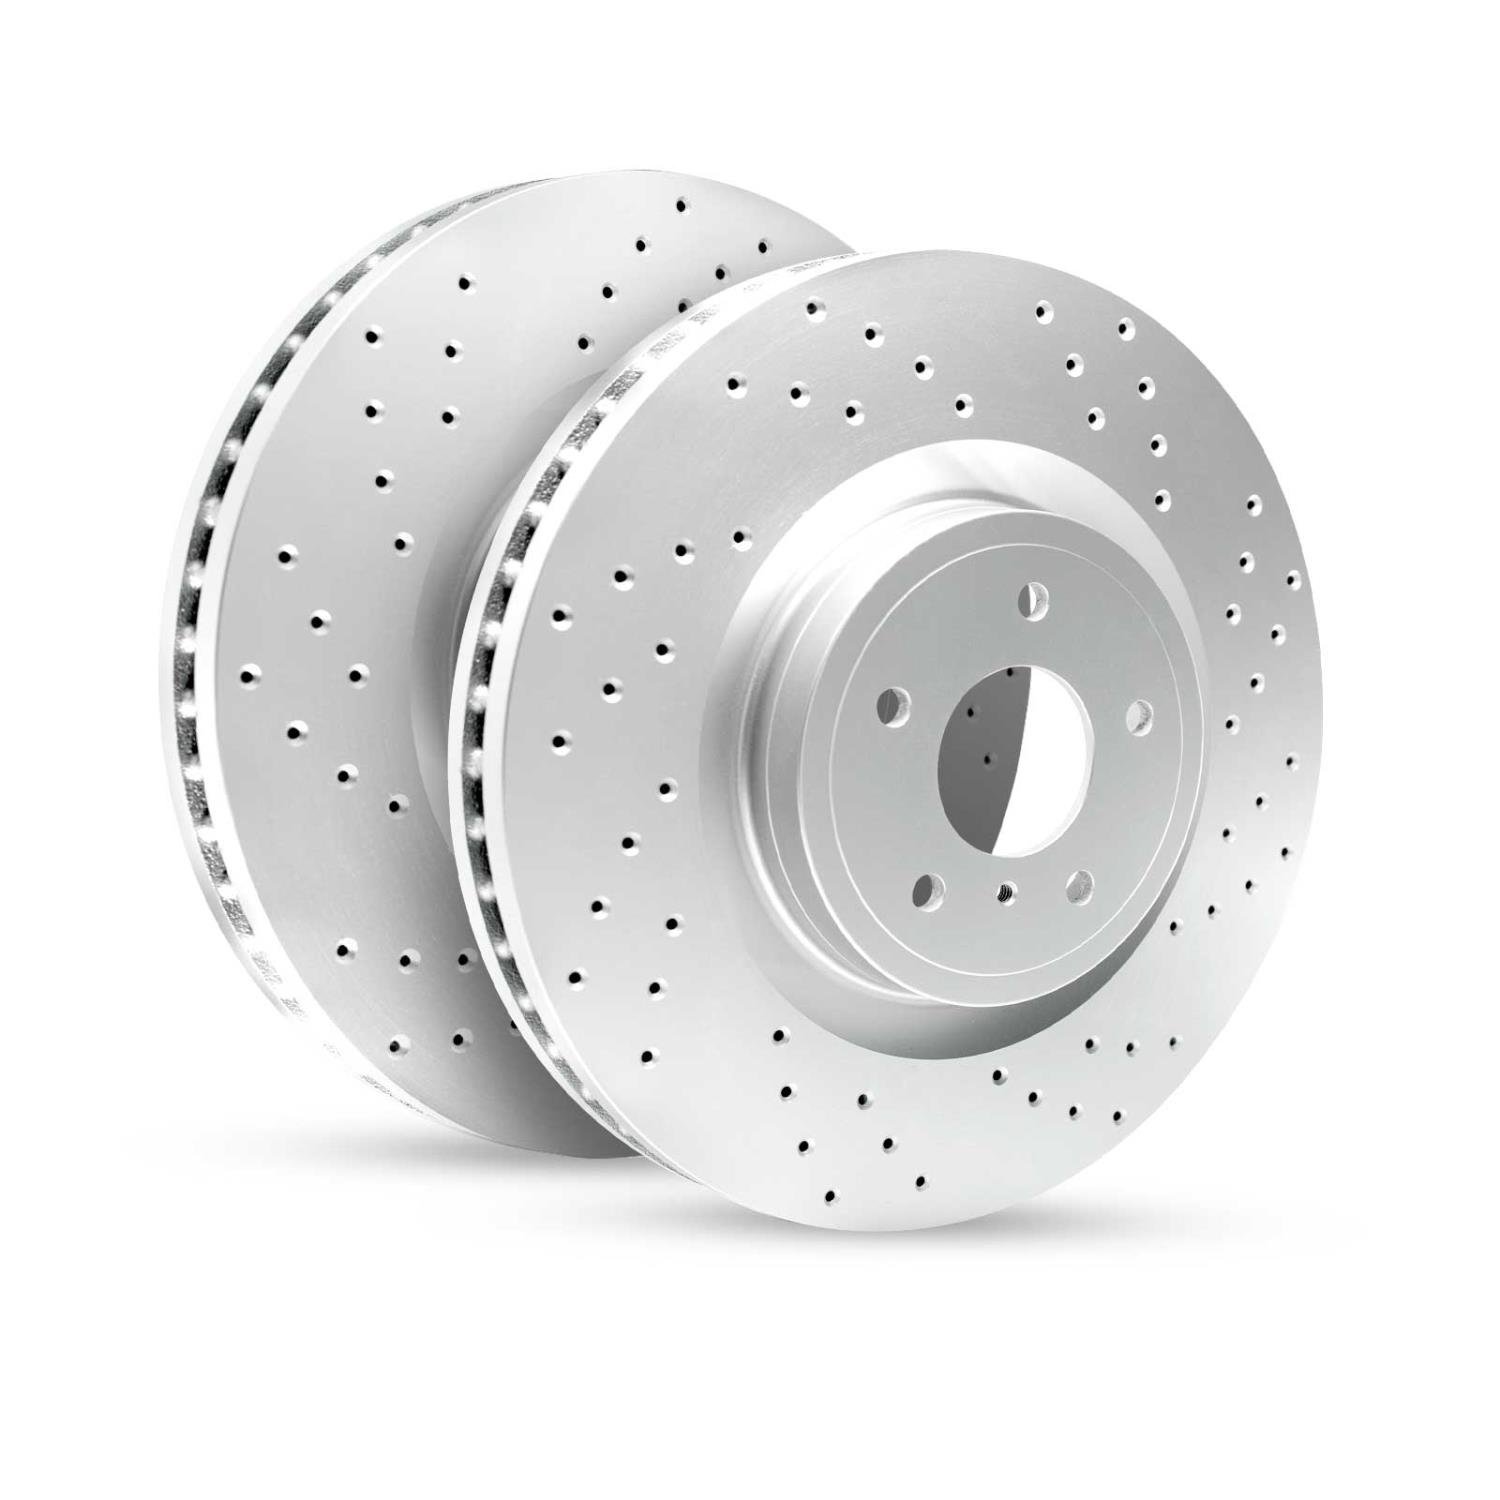 GEO-Carbon Drilled/Slotted Rotors, 2003-2008 Infiniti/Nissan, Position: Rear